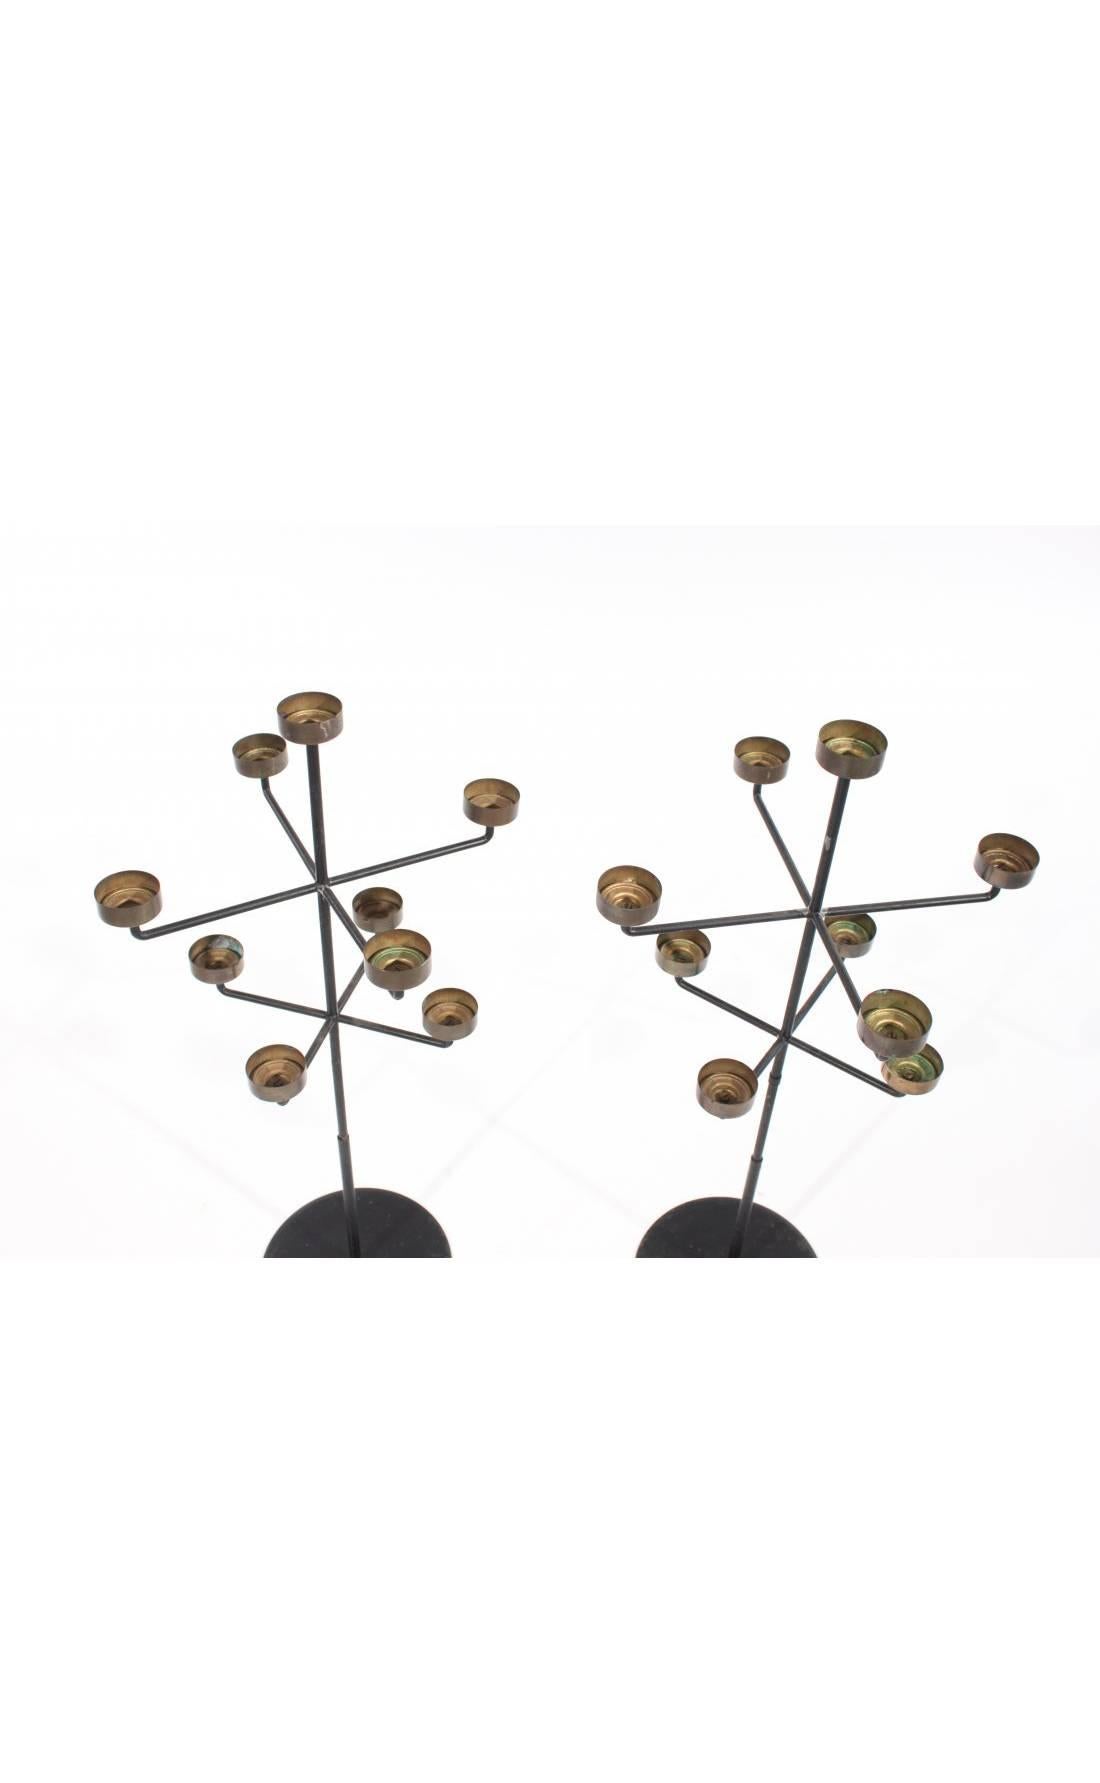 These Midcentury candelabras have a whimsical quality to their tree-like forms. They are minimally designed and are comprised of an iron stand and brass candleholders.

The candelabras are structurally sound. They sit evenly on a surface. However,